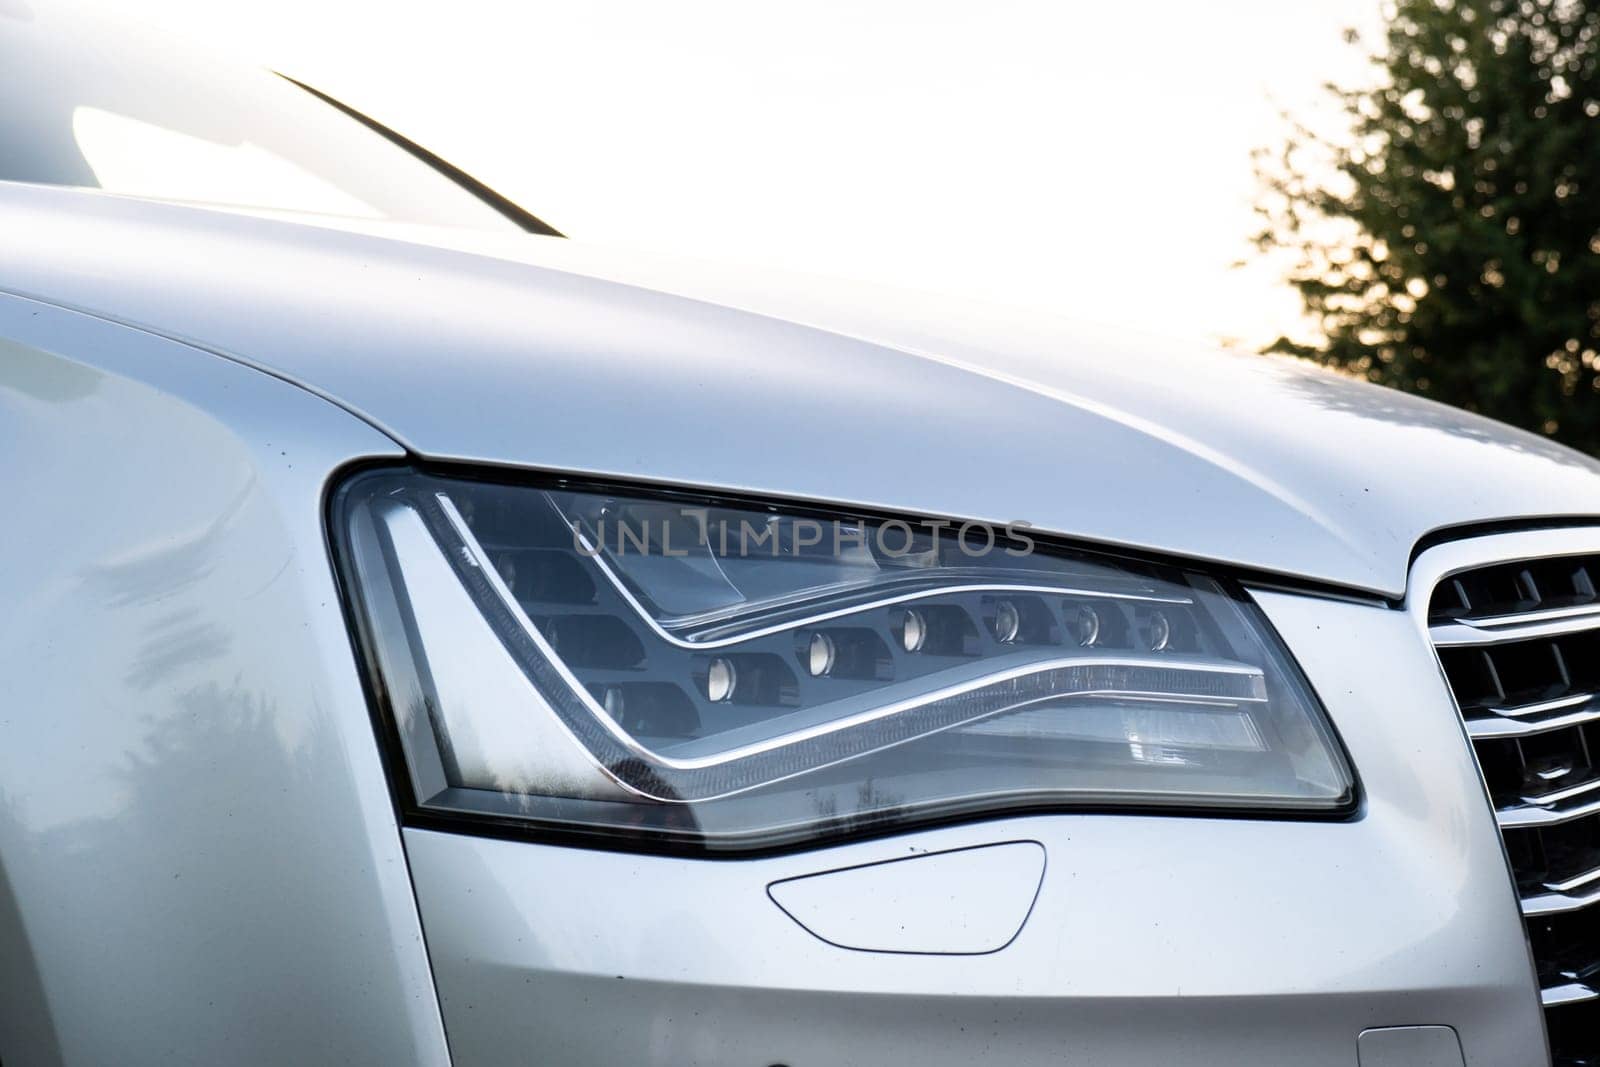 Clean car after Washing luxury silver car. Sedan car exterior of modern luxury car during sunset on highway road. Details of front headlamp. Prestige sport automobile